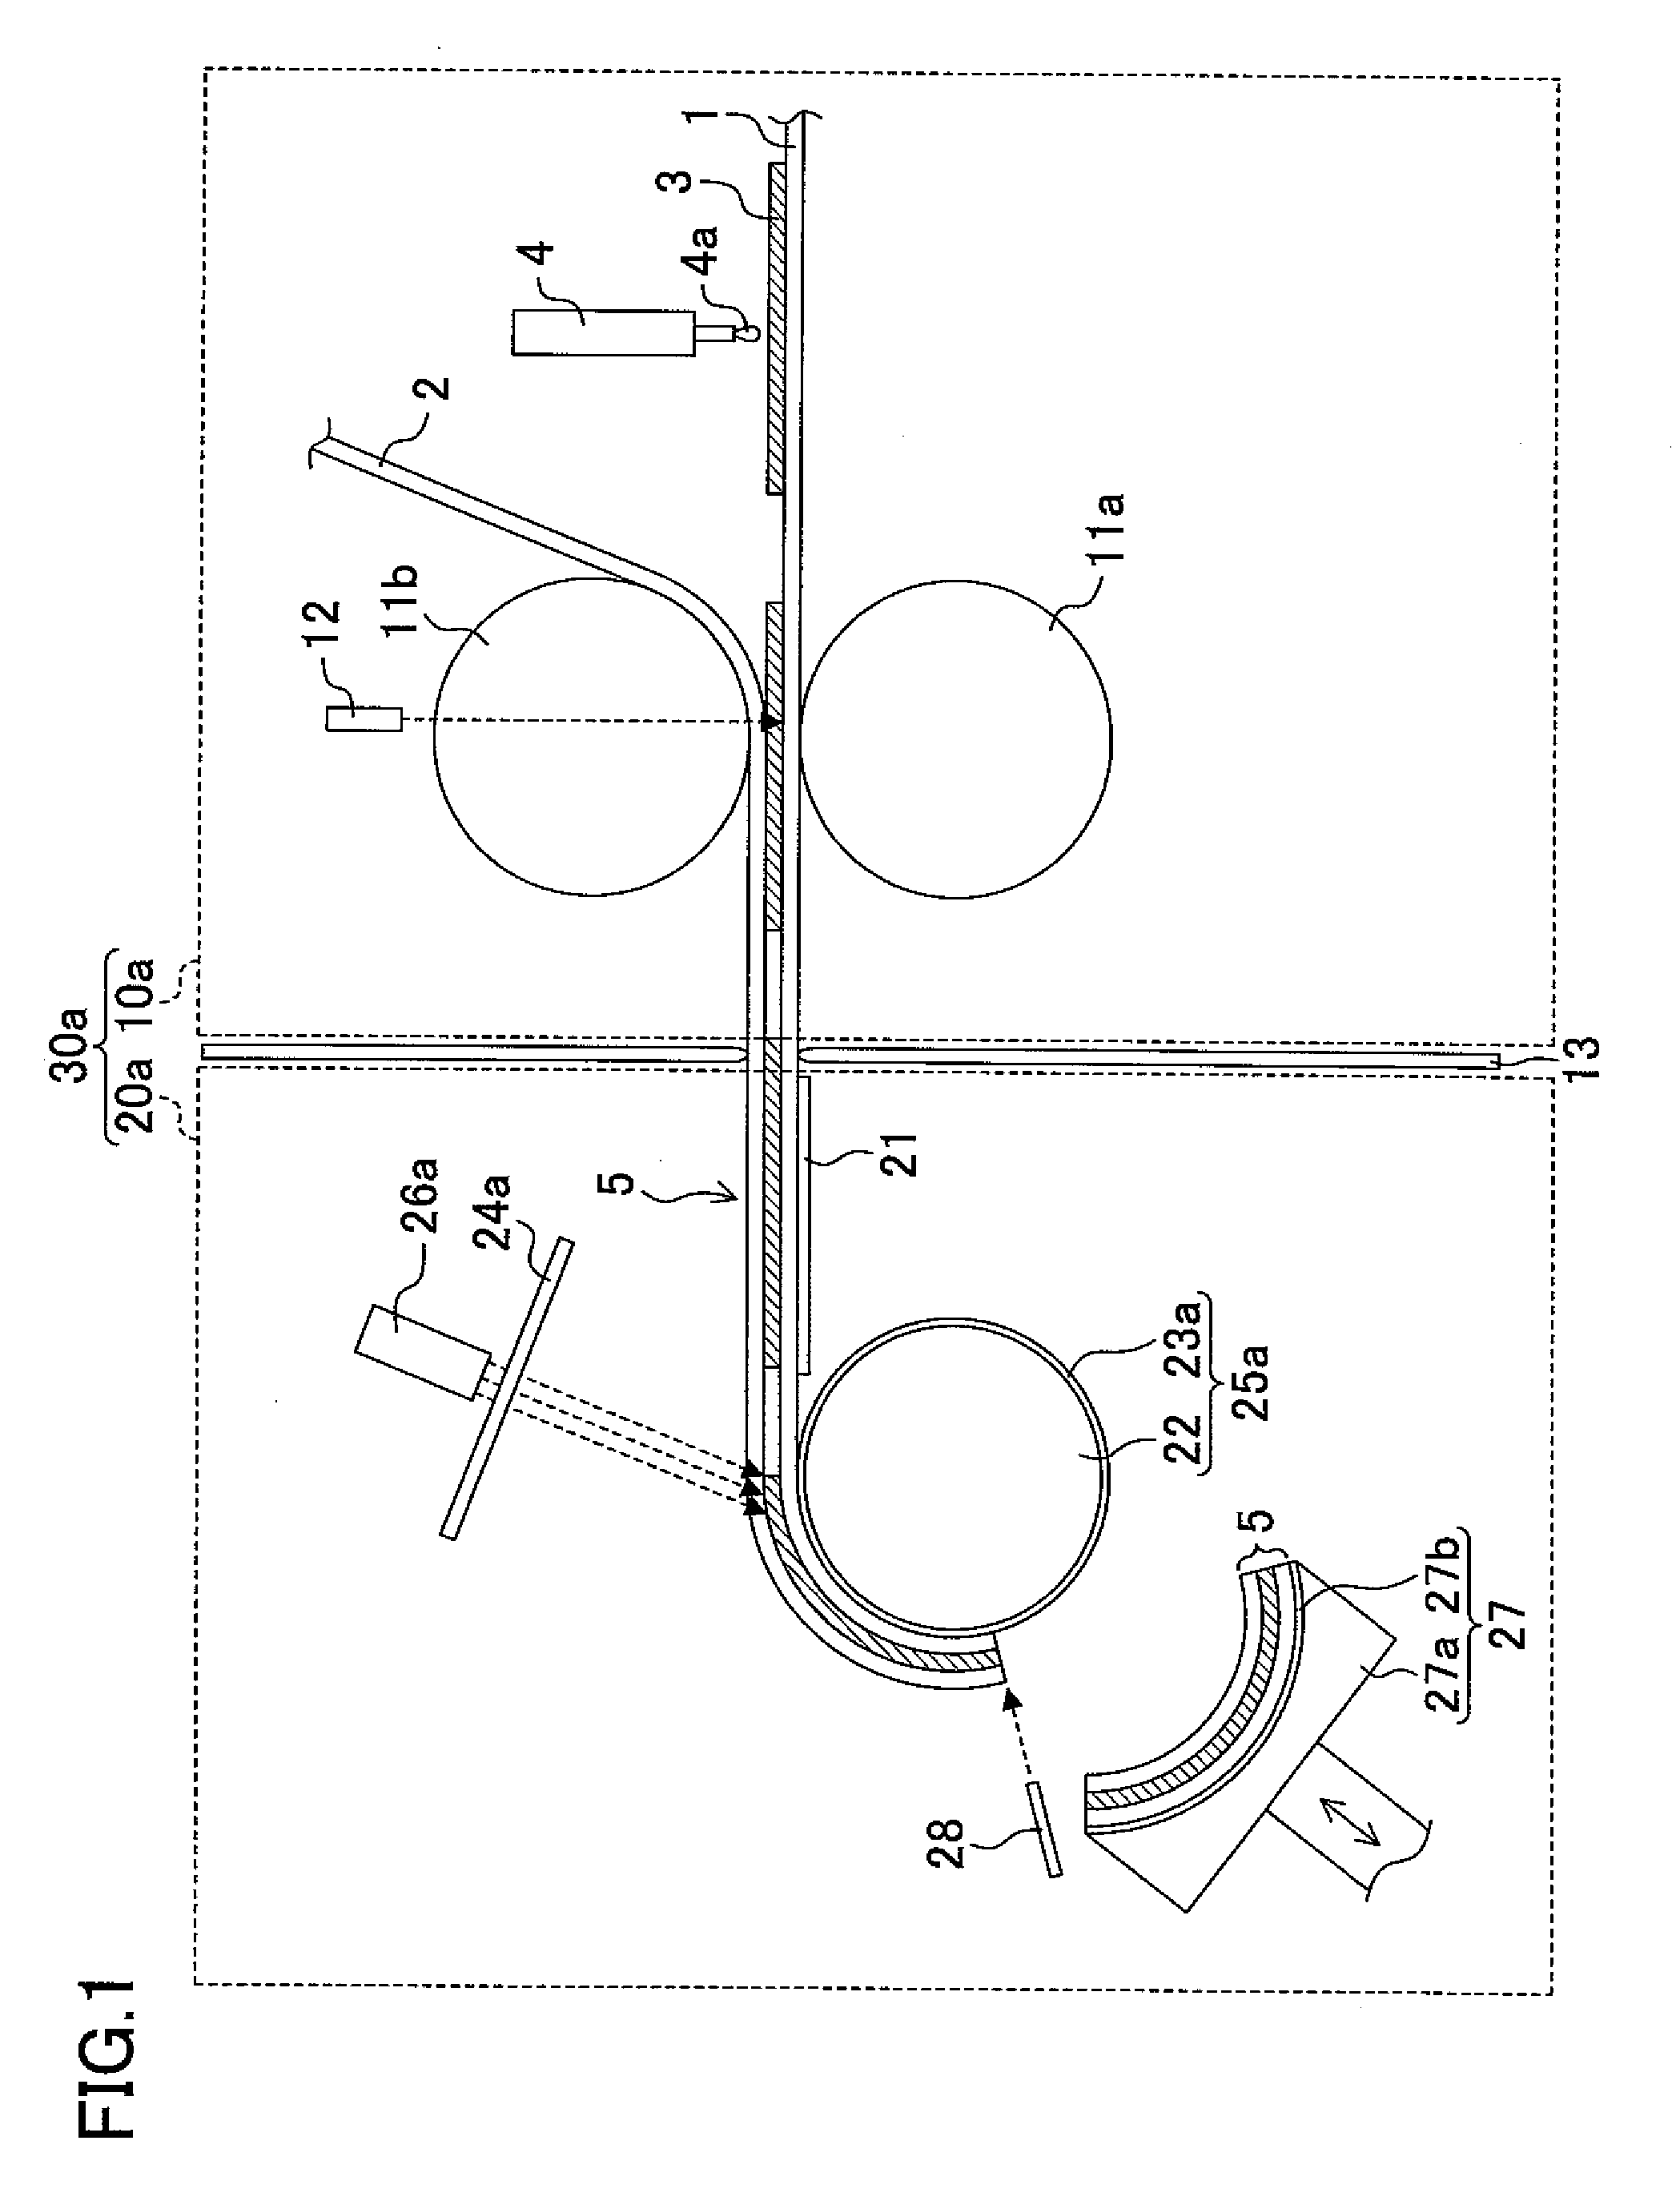 Apparatus and method for manufacturing display panel, and display panel manufactured by the method